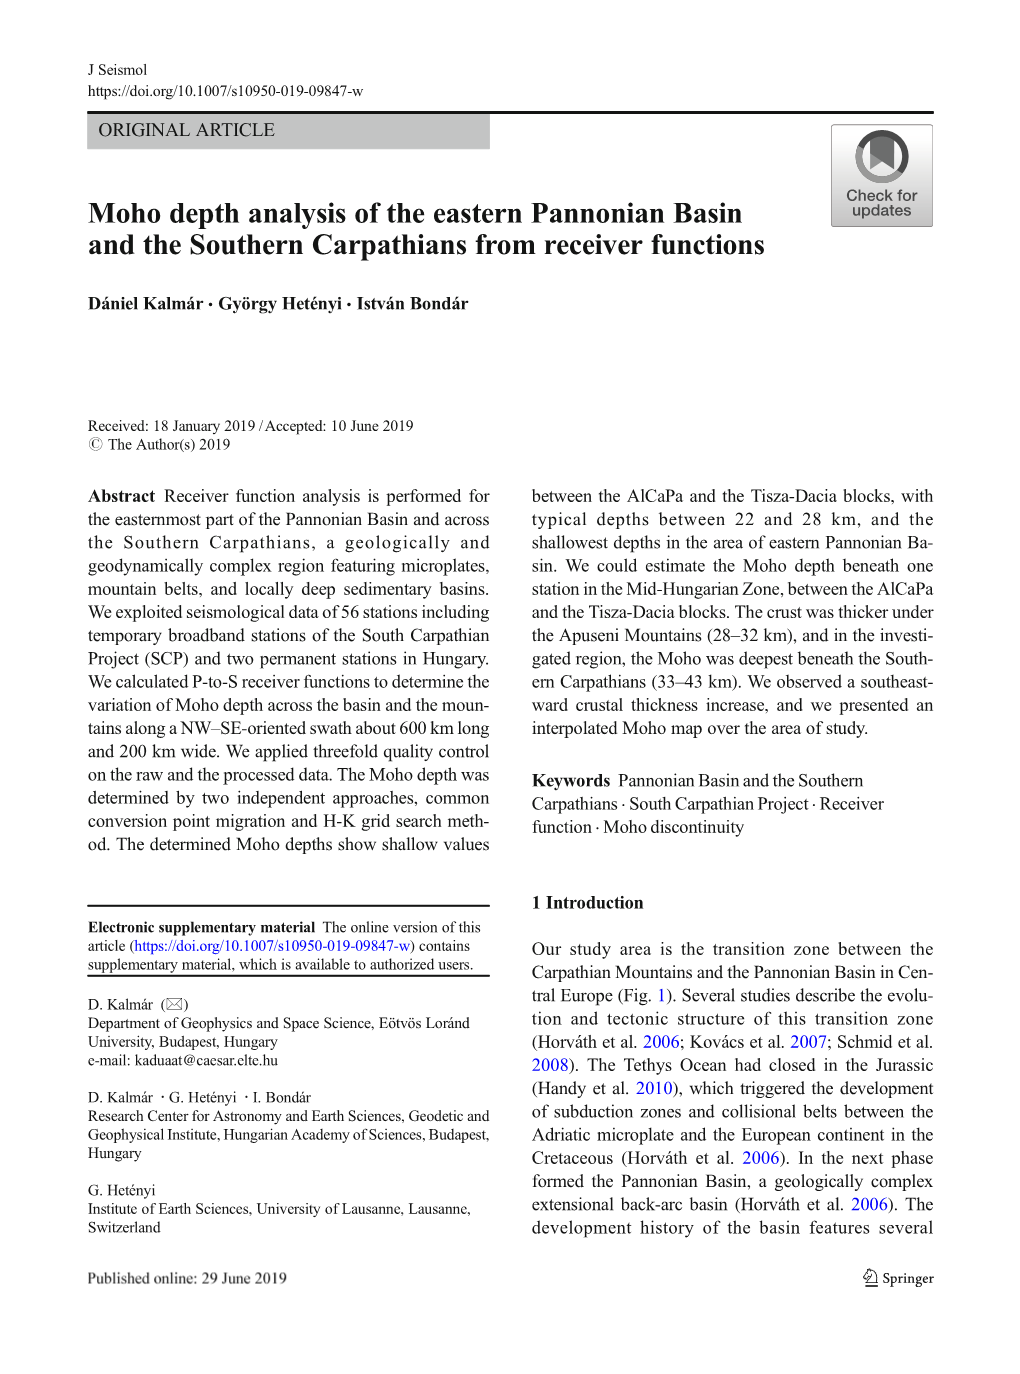 Moho Depth Analysis of the Eastern Pannonian Basin and the Southern Carpathians from Receiver Functions